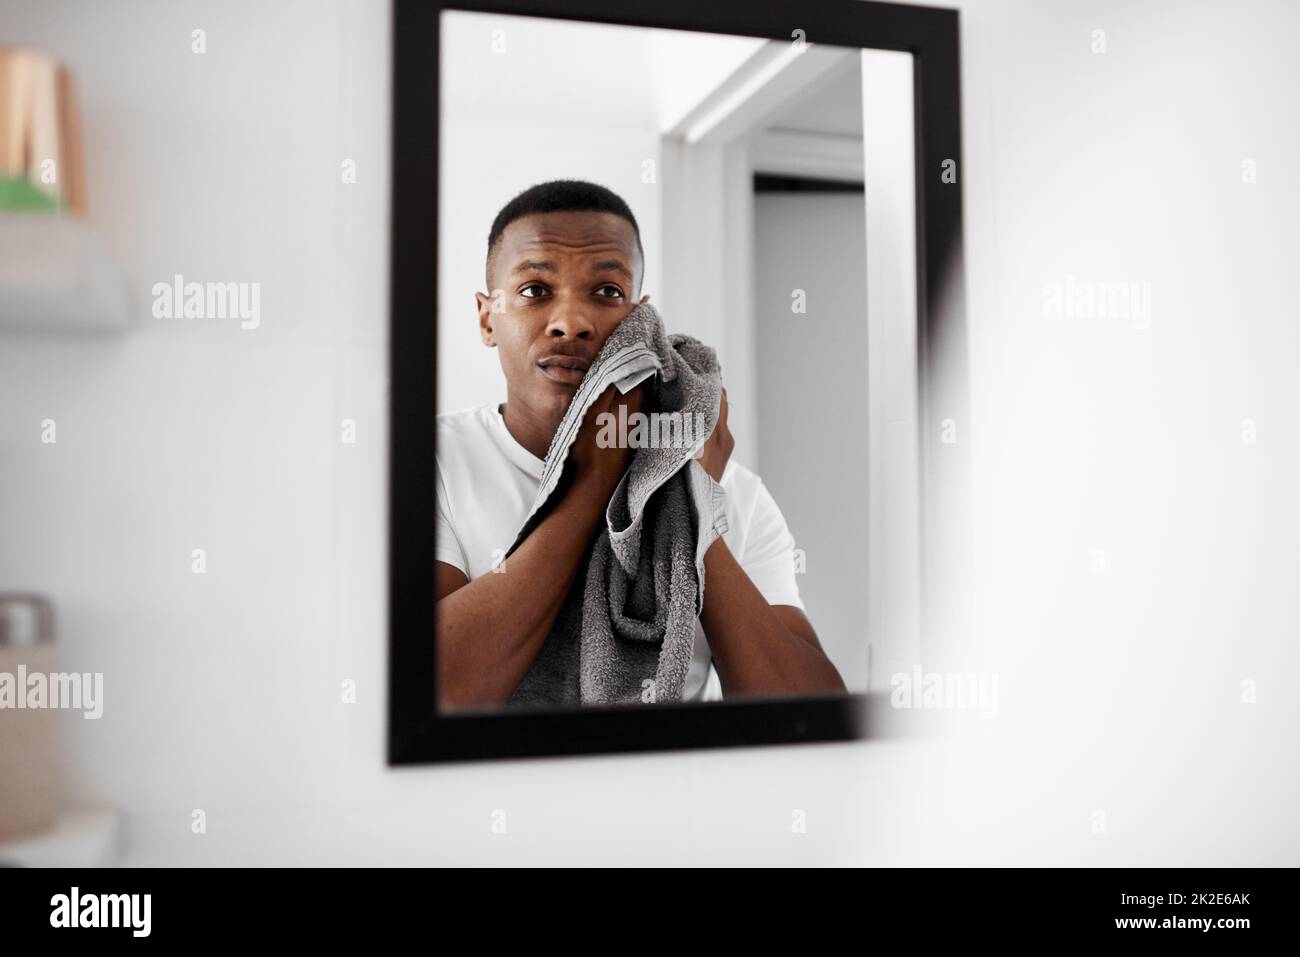 A fresh face is how you start your day. Cropped shot of a man looking into the mirror while drying his face with a towel. Stock Photo